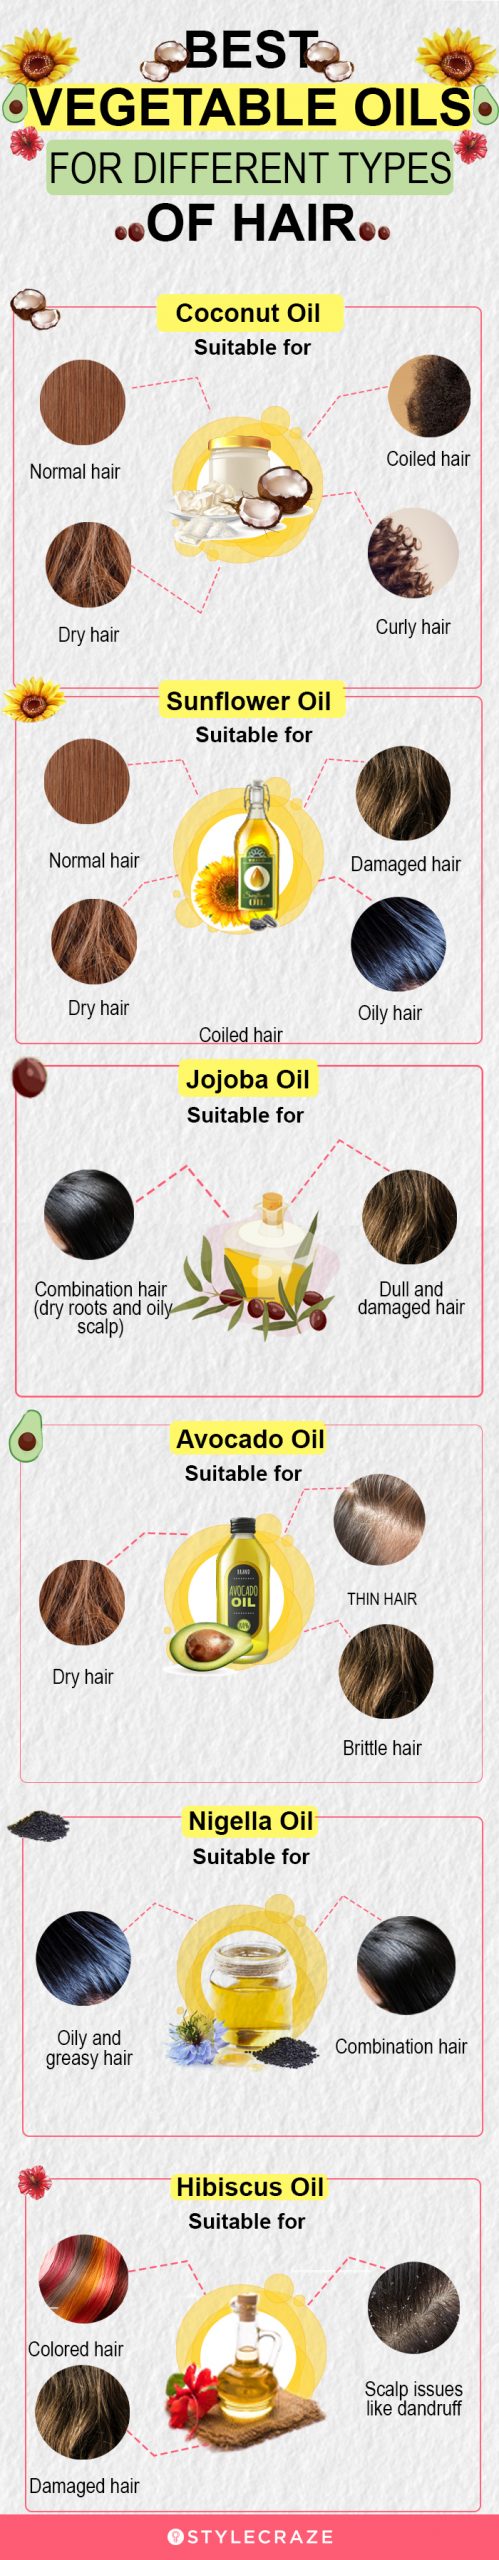 hair care tips for protective styles [infographic]